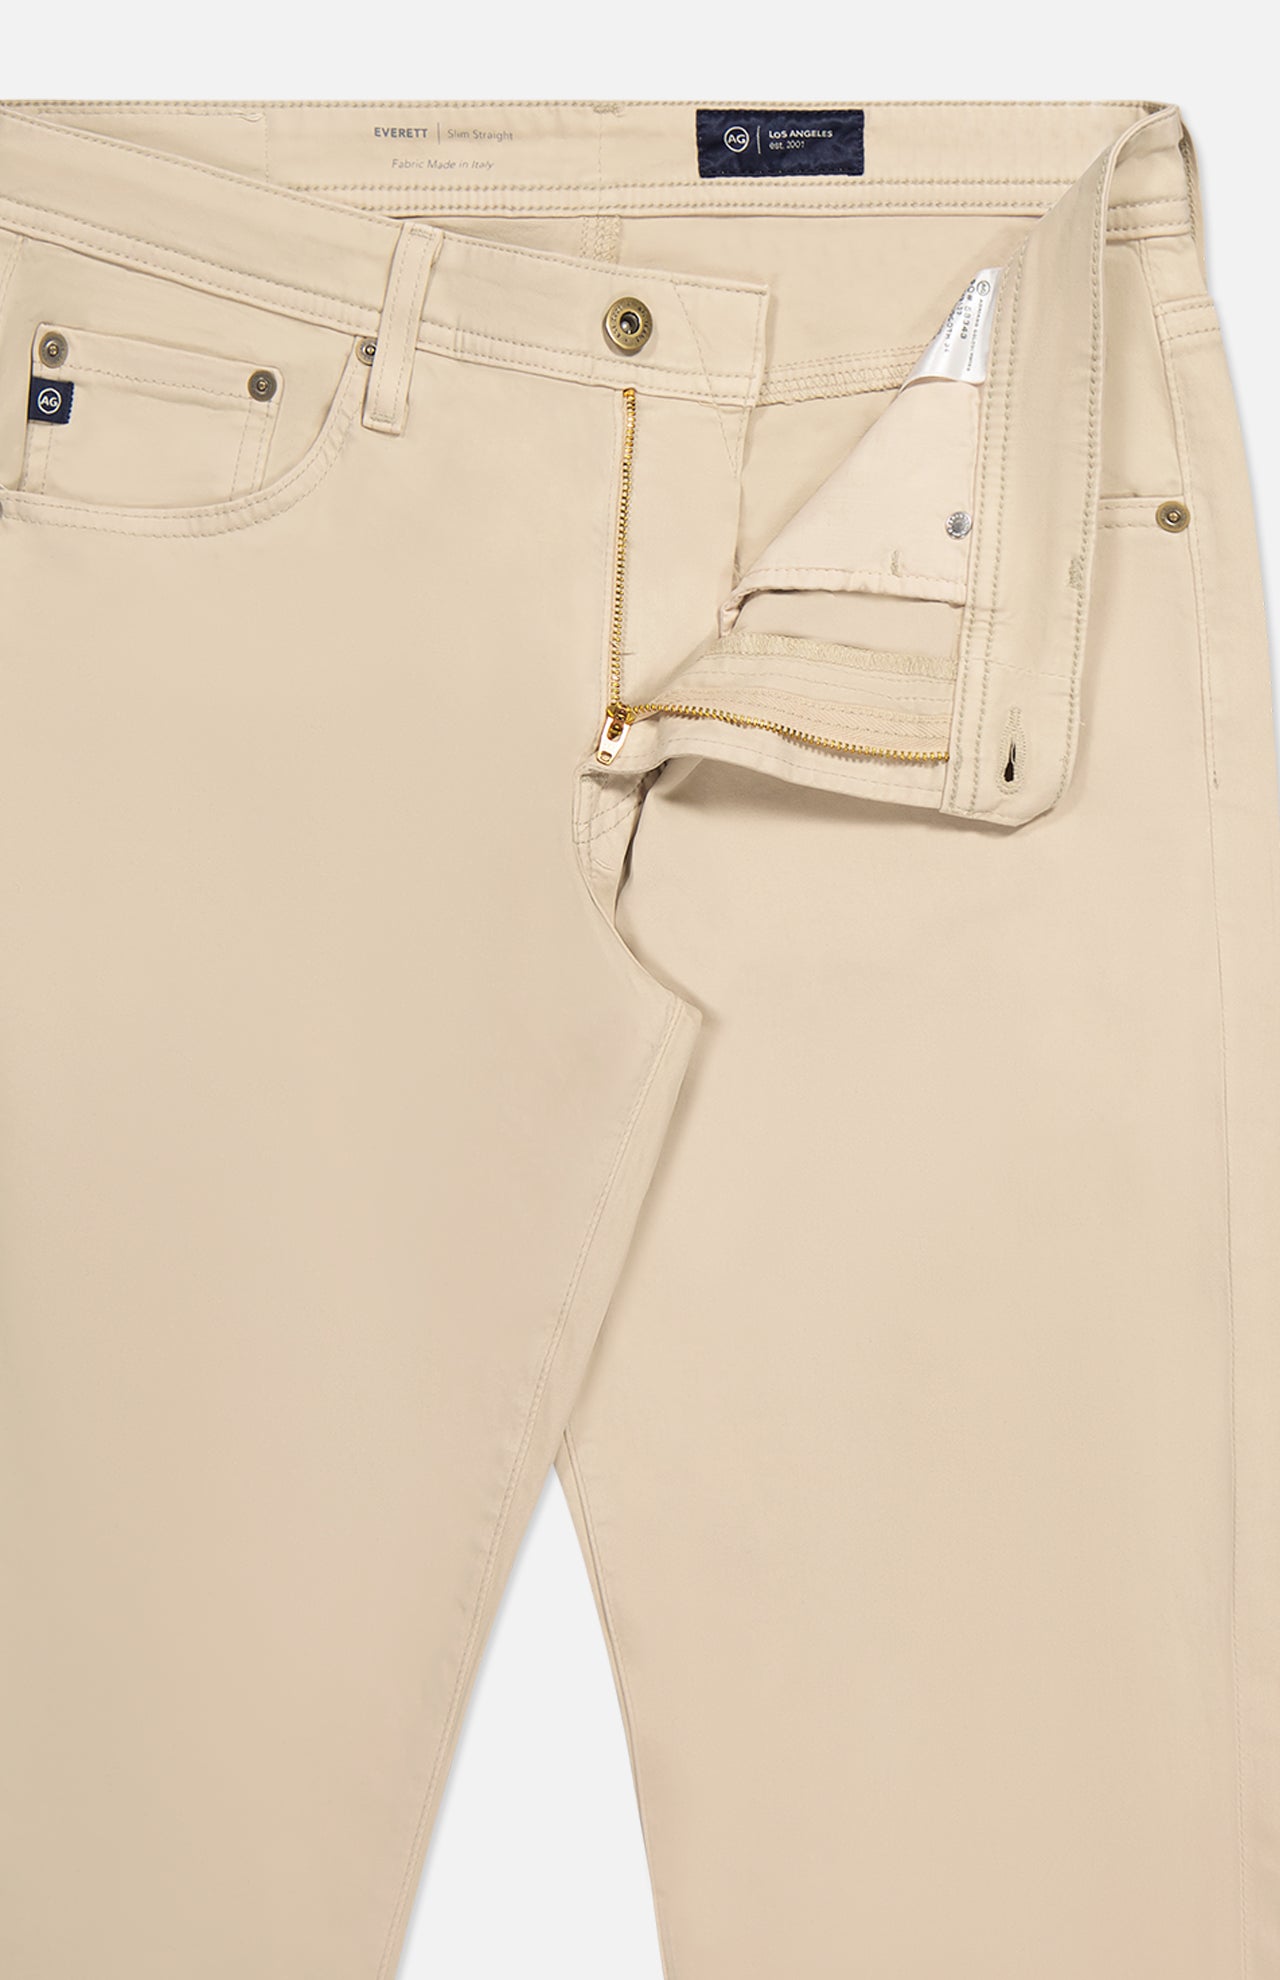 Everett Pant in Cream Froth (7312310009971)